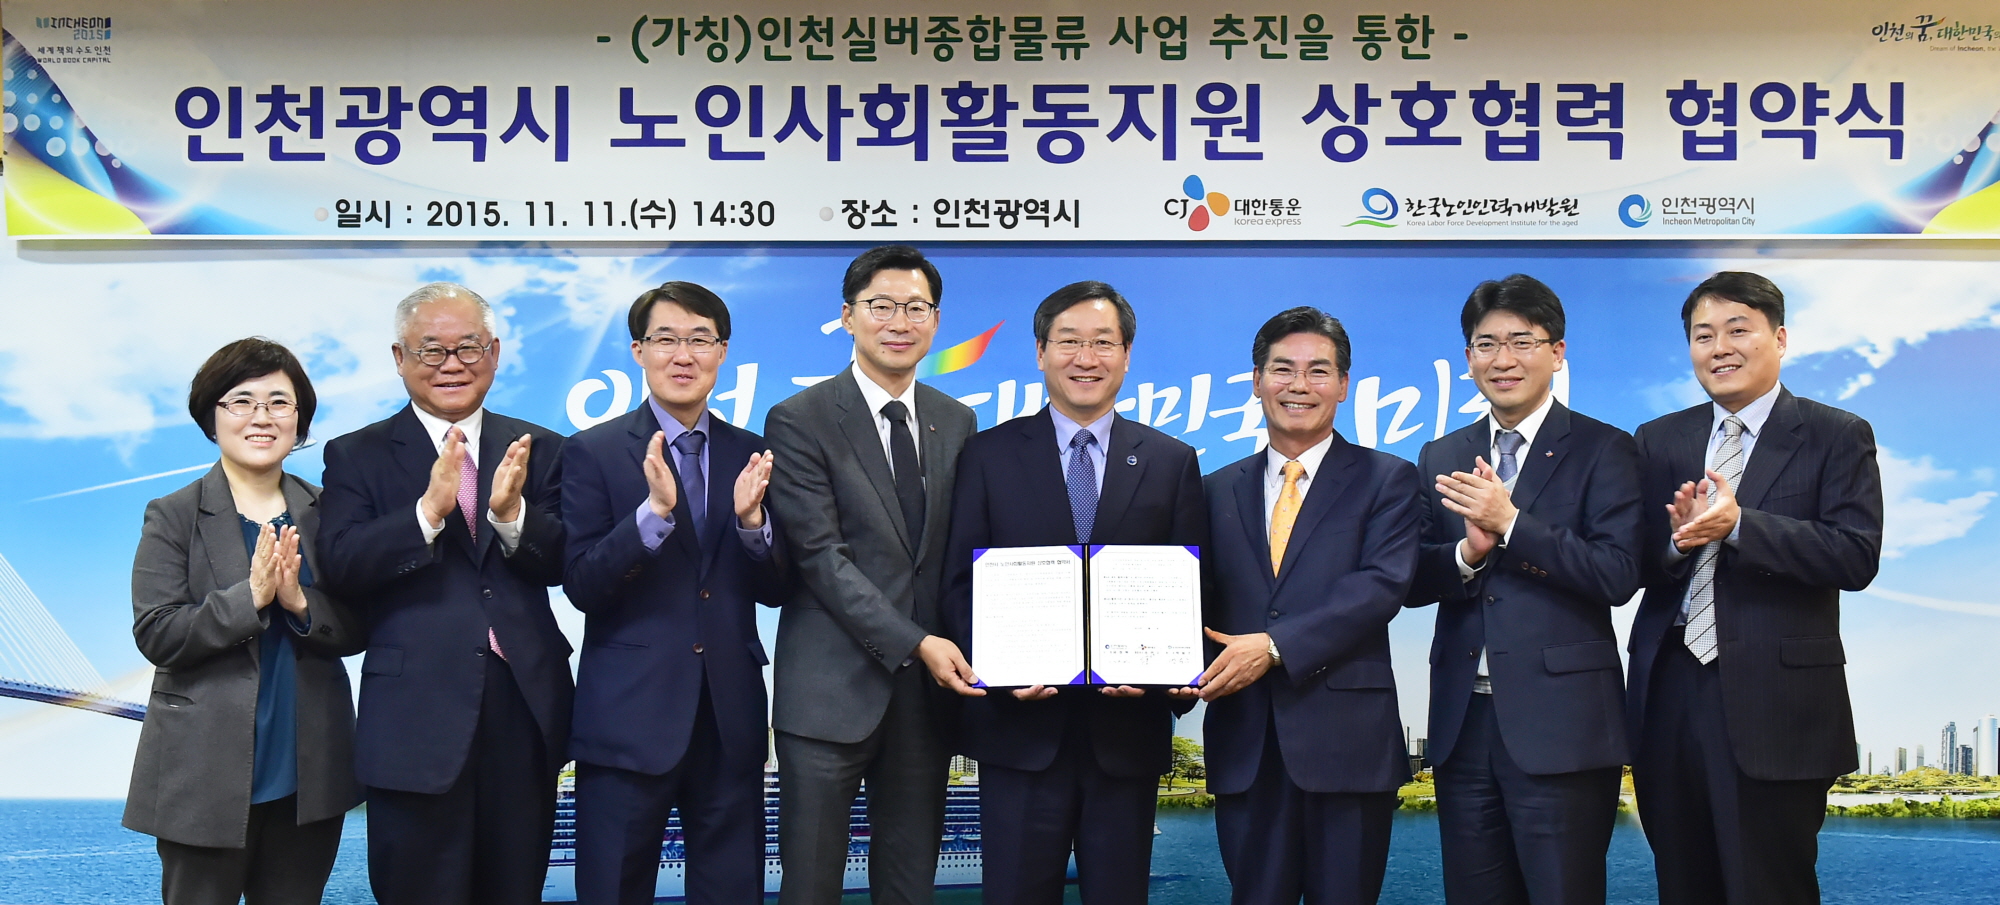 Incheon’s city government signed an agreement with CJ Korea Express and the Korea Labor Force Development Institute for the Aged to cooperate on carrying forward the 'Incheon Silver Total Distribution Business'. (Image : Korea Labor Force Development Institute for the Aged Homepage)